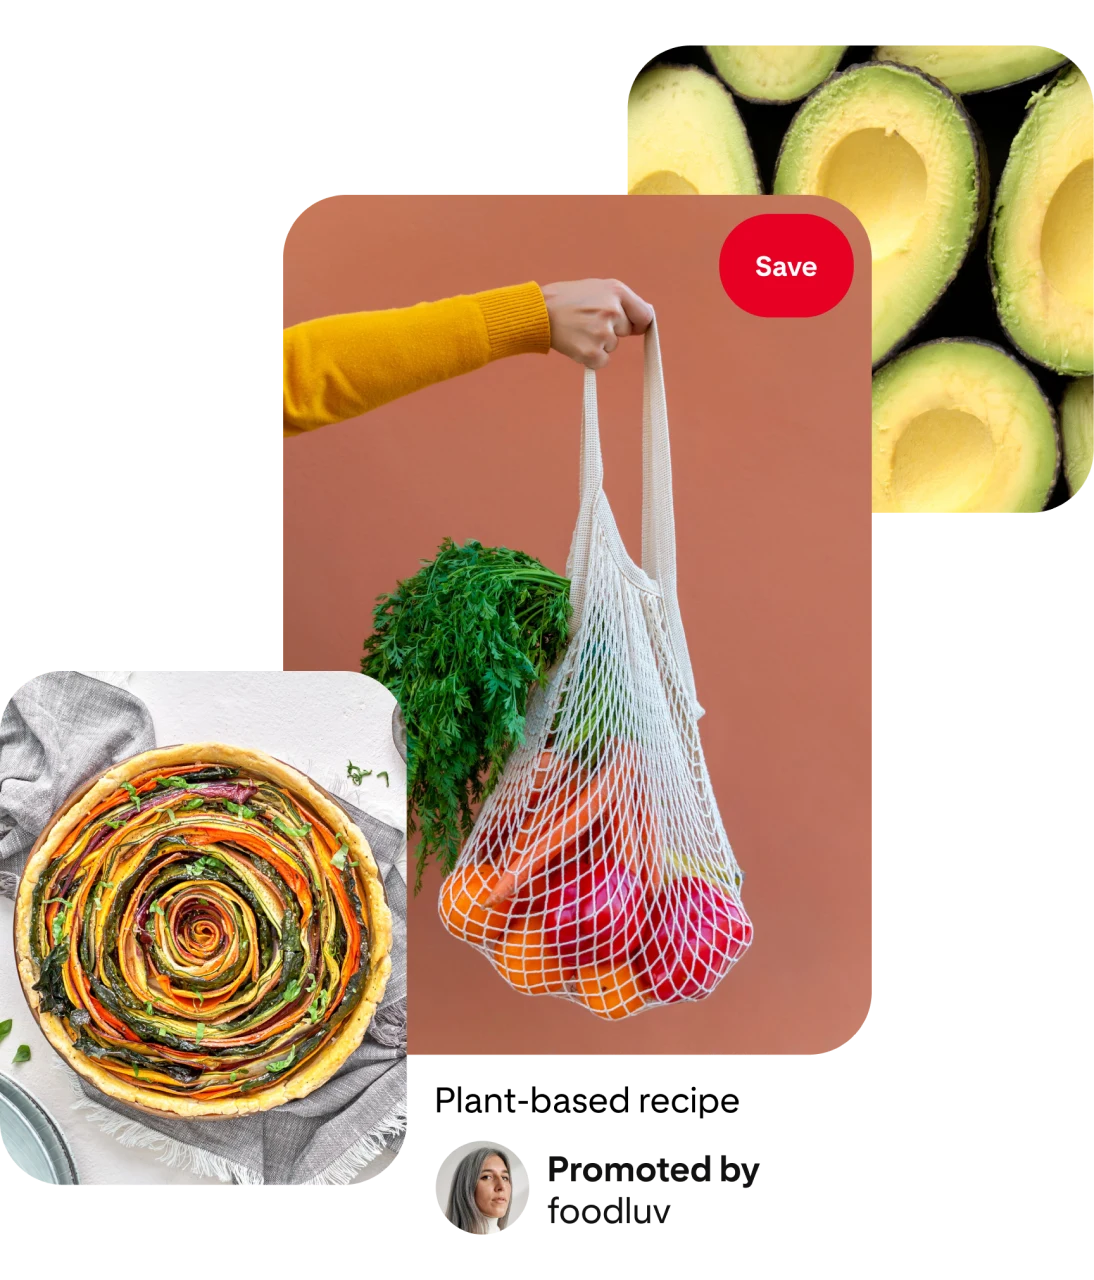 Collage of Pins: aerial view of a colorful, swirled vegetable tart. White hand in a yellow sleeve holds a white-mesh shopping bag with orange and yellow vegetables, green stems coming out of the bag. Aerial view of bright green avocado halves.